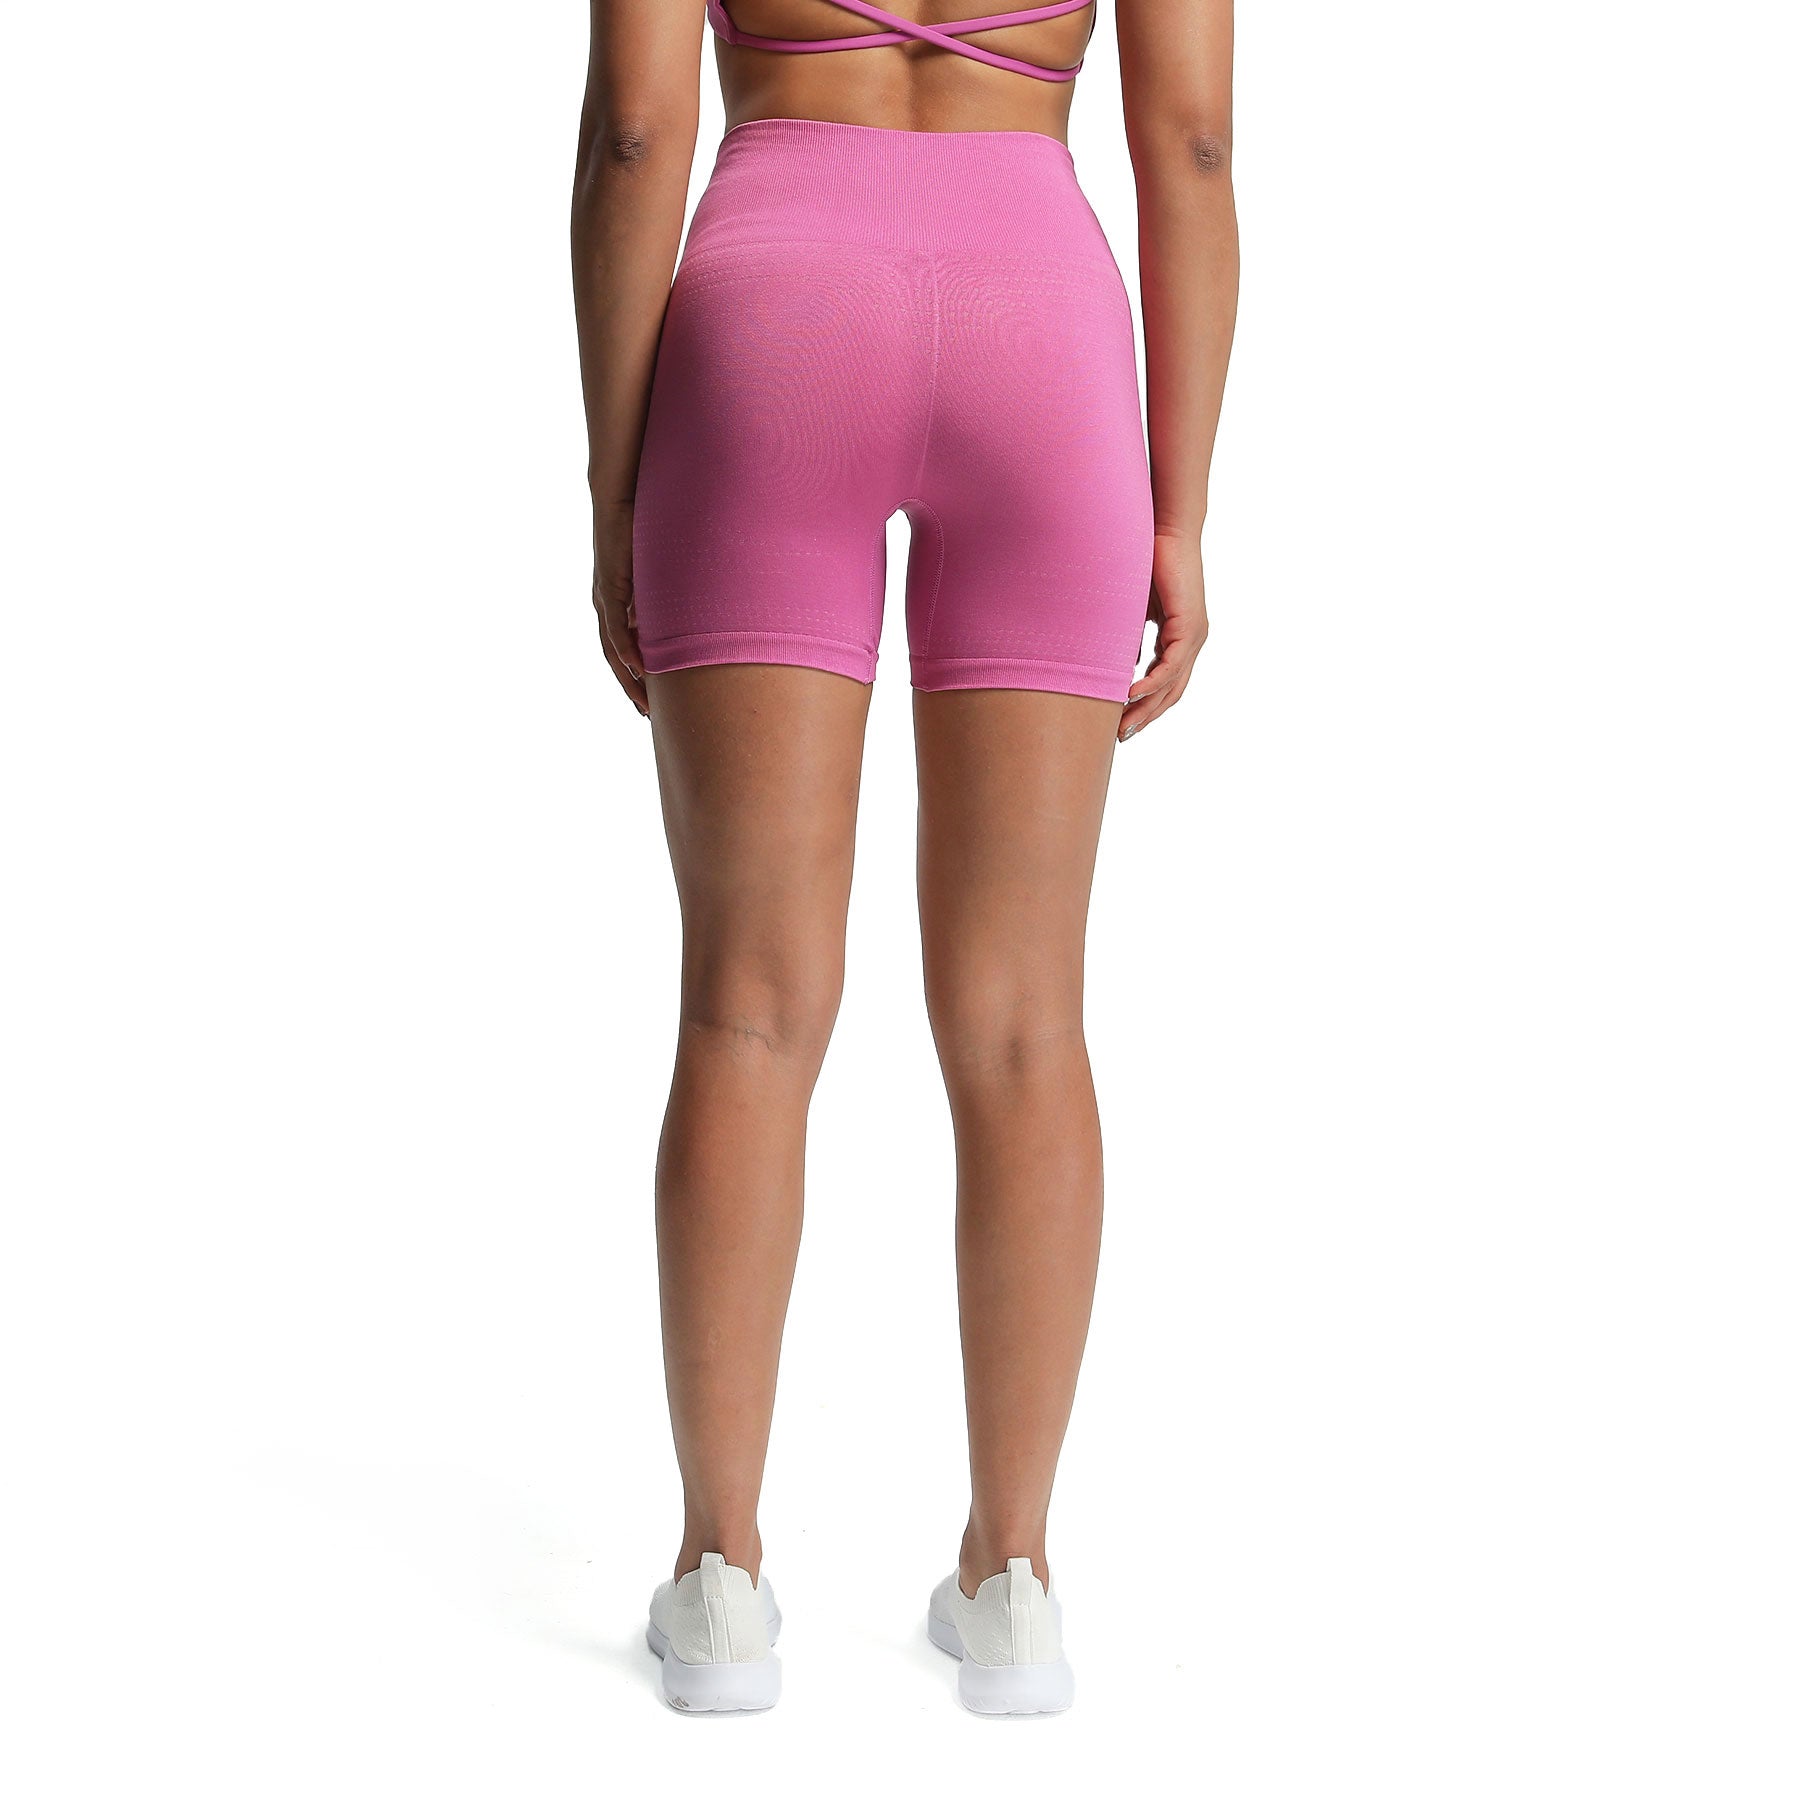 Aoxjox "Vital 2.0 / 3.0" Seamless  Shorts (CONT'D)